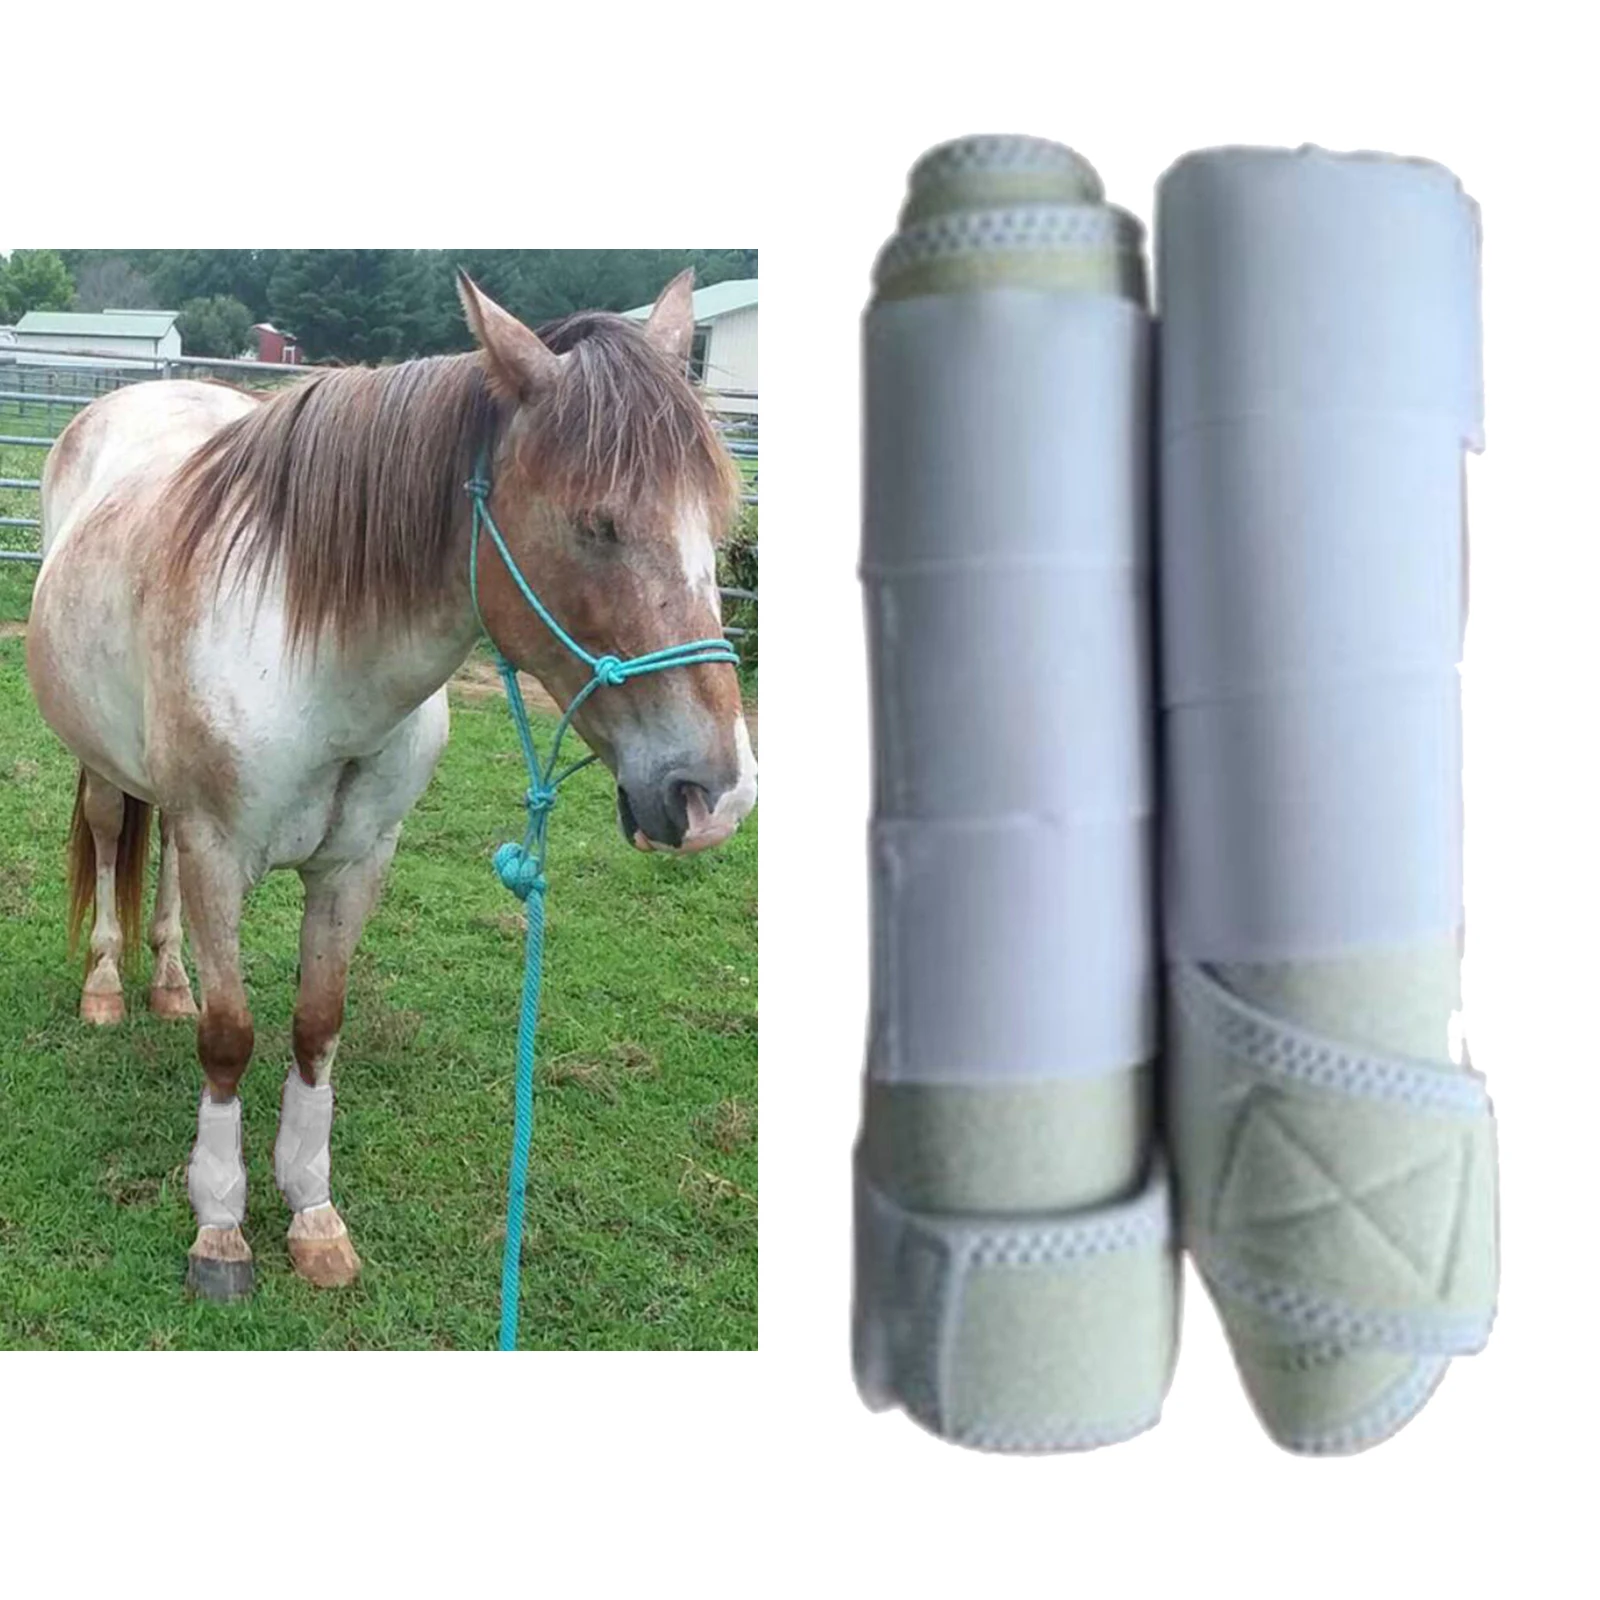 Horse Boots Equestrian Front Hind Tendon Boot Leg Protection, Horse Pony Jumping Boot Leg Protective Absorbing Breathable Boots